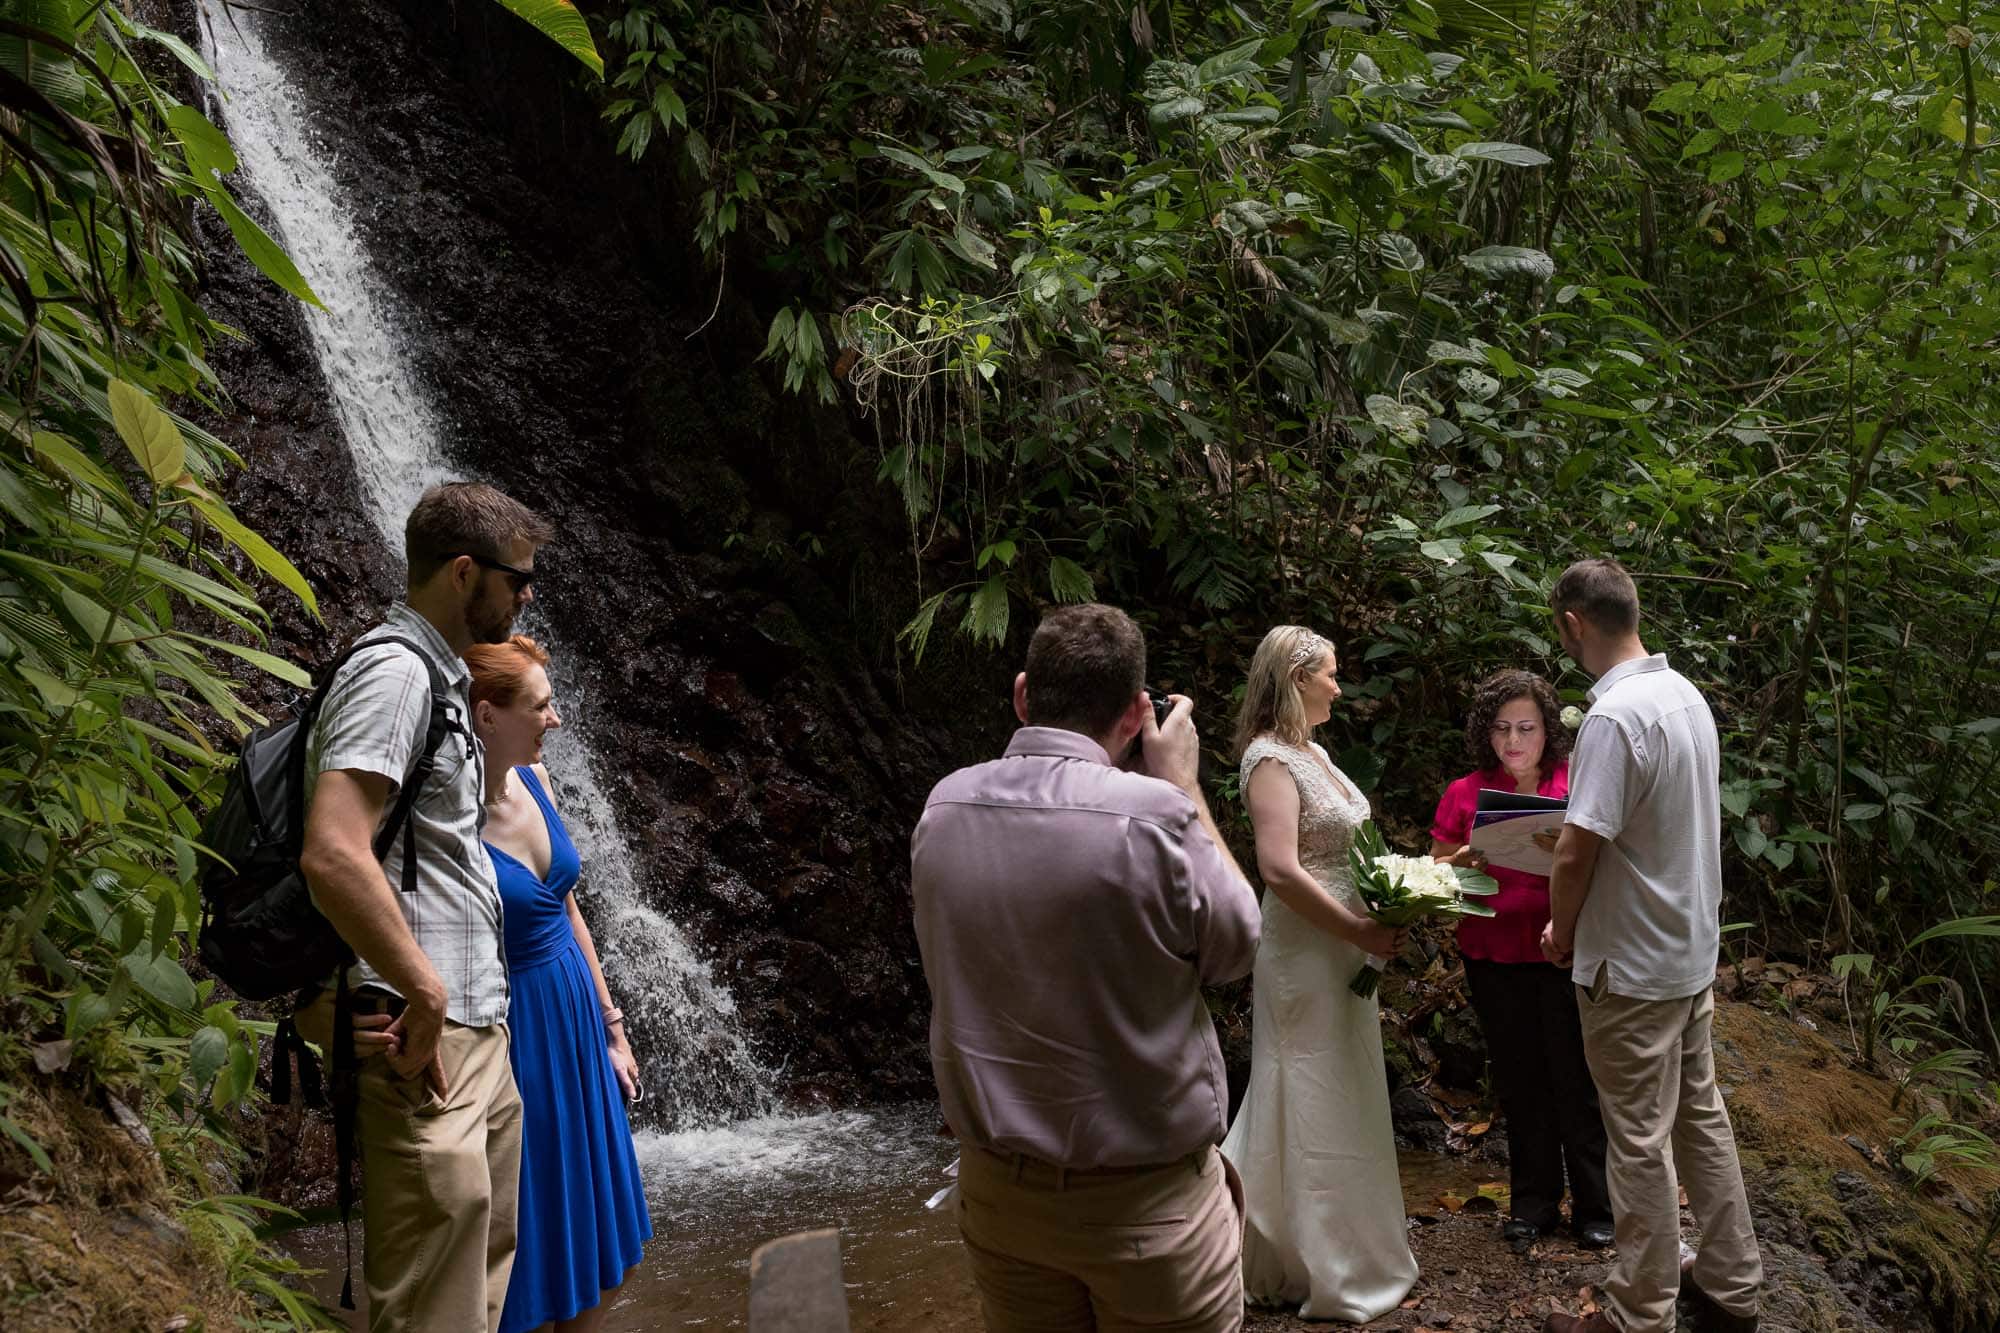 Waterfall ceremony in the Costa Rican rainforest